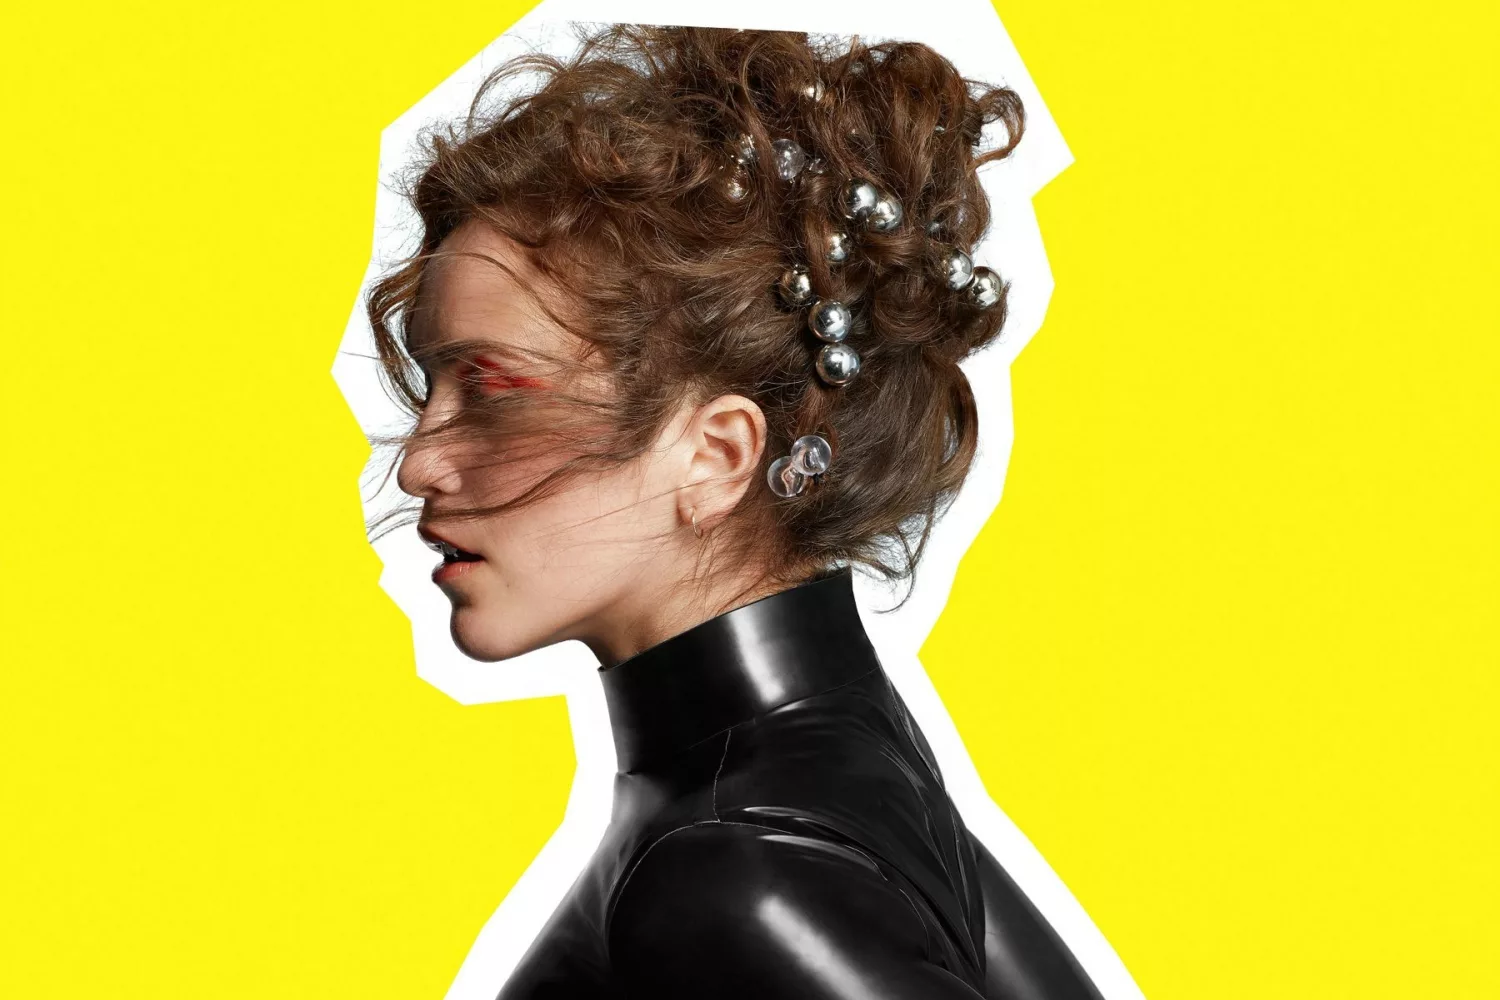 Listen to new albums from Rae Morris, Hookworms and more